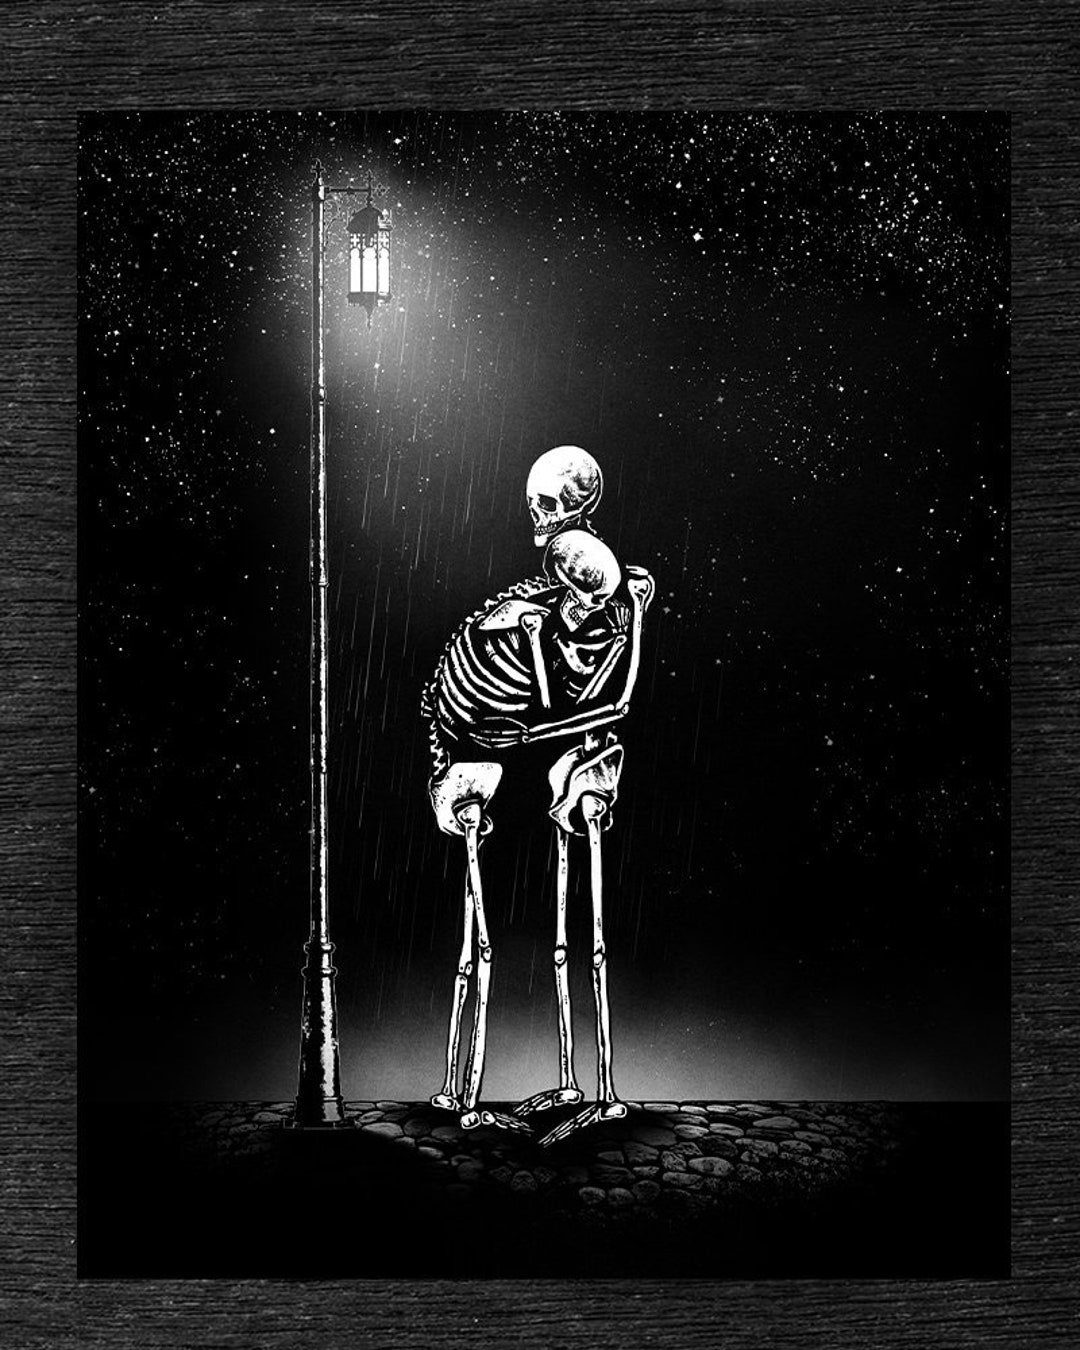 A black and white photo of two skeletons hugging under the street light - Gothic